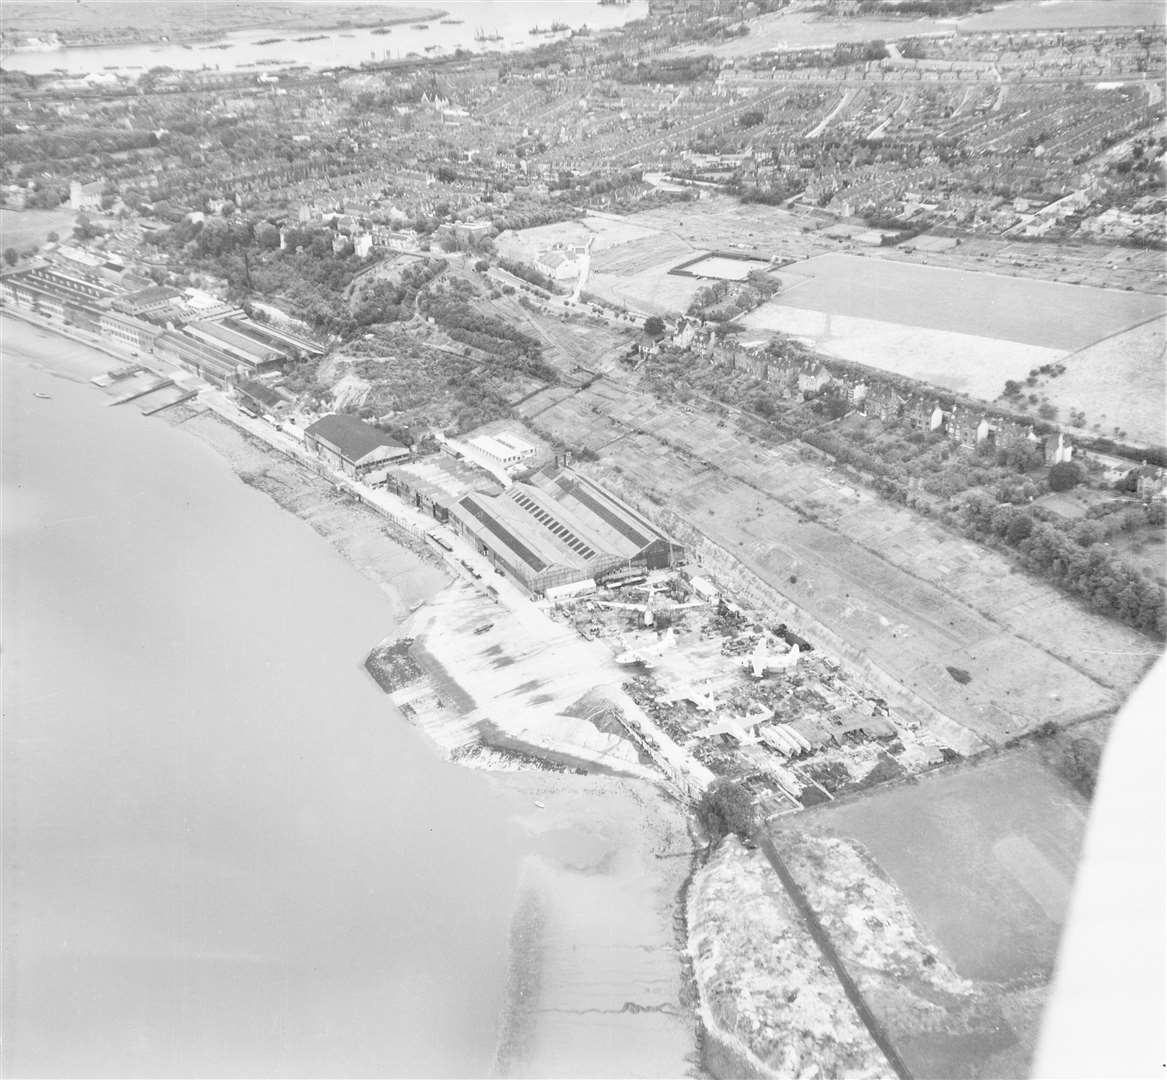 The Short Brothers Seaplane Factory, Rochester, 1946. Picture: HES Archives.